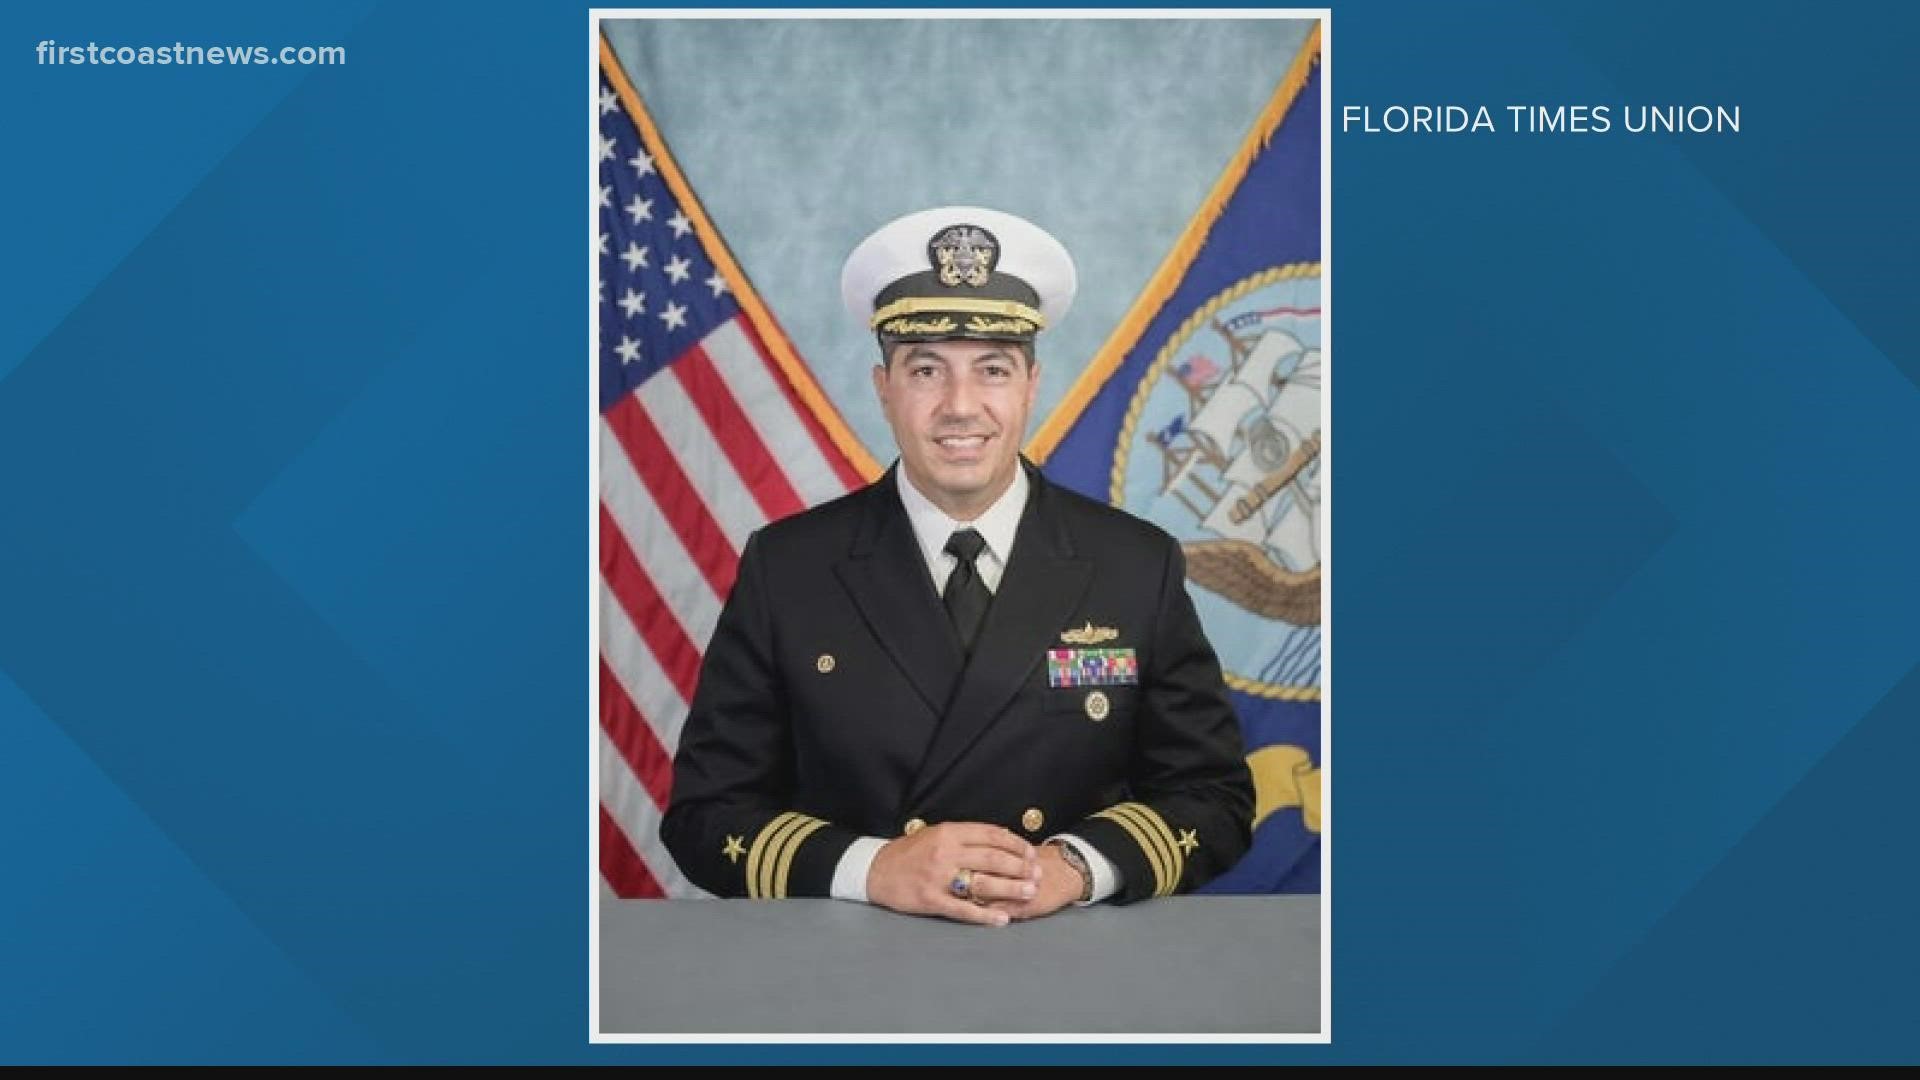 Cmdr. Jeffrey Servello was removed from duty on Jan. 6 "due to a loss of confidence in his ability to command," according to a brief Navy statement.